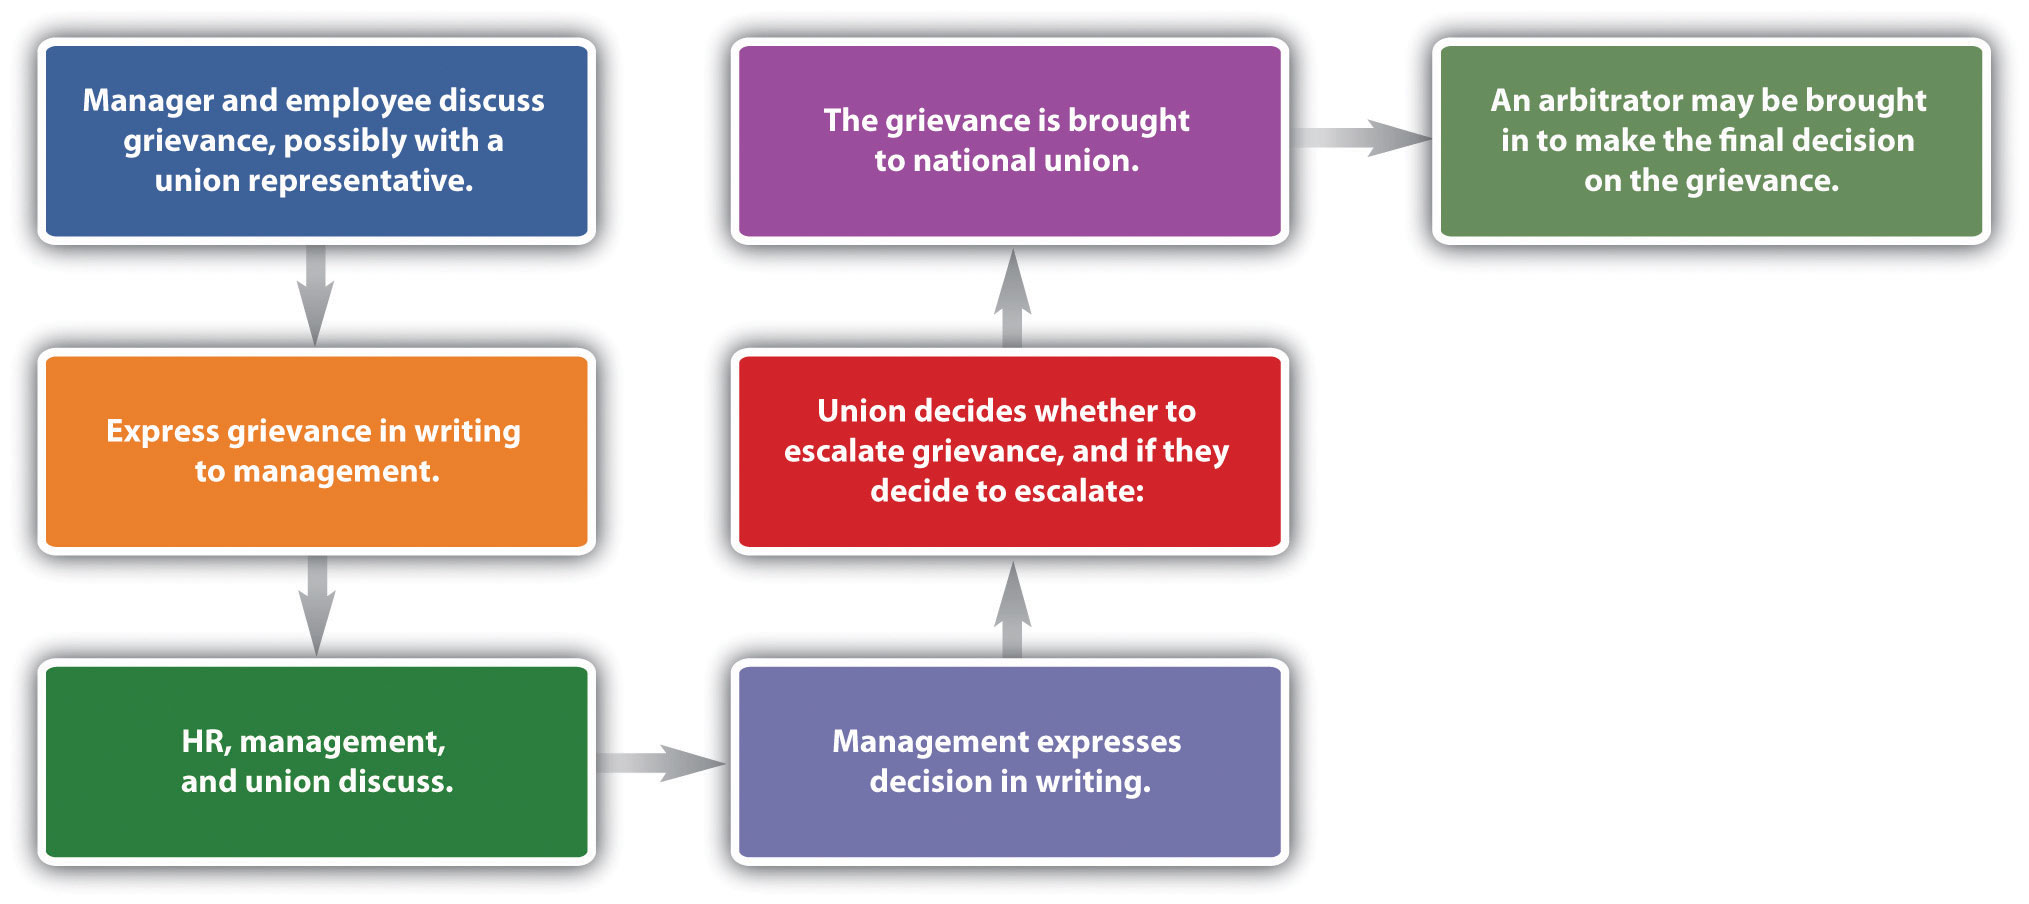 A Sample Grievance Process in order: manager and employee discuss grievance, possibly with a union representative; express grievance in writing to management; HR, management, and union discuss; management expresses decision in writing; union decides whether to escalate grievance, and if they decide to escalate; the grievance is brought to national union; an arbitrator may be brough in to make the final decision on the grievance.